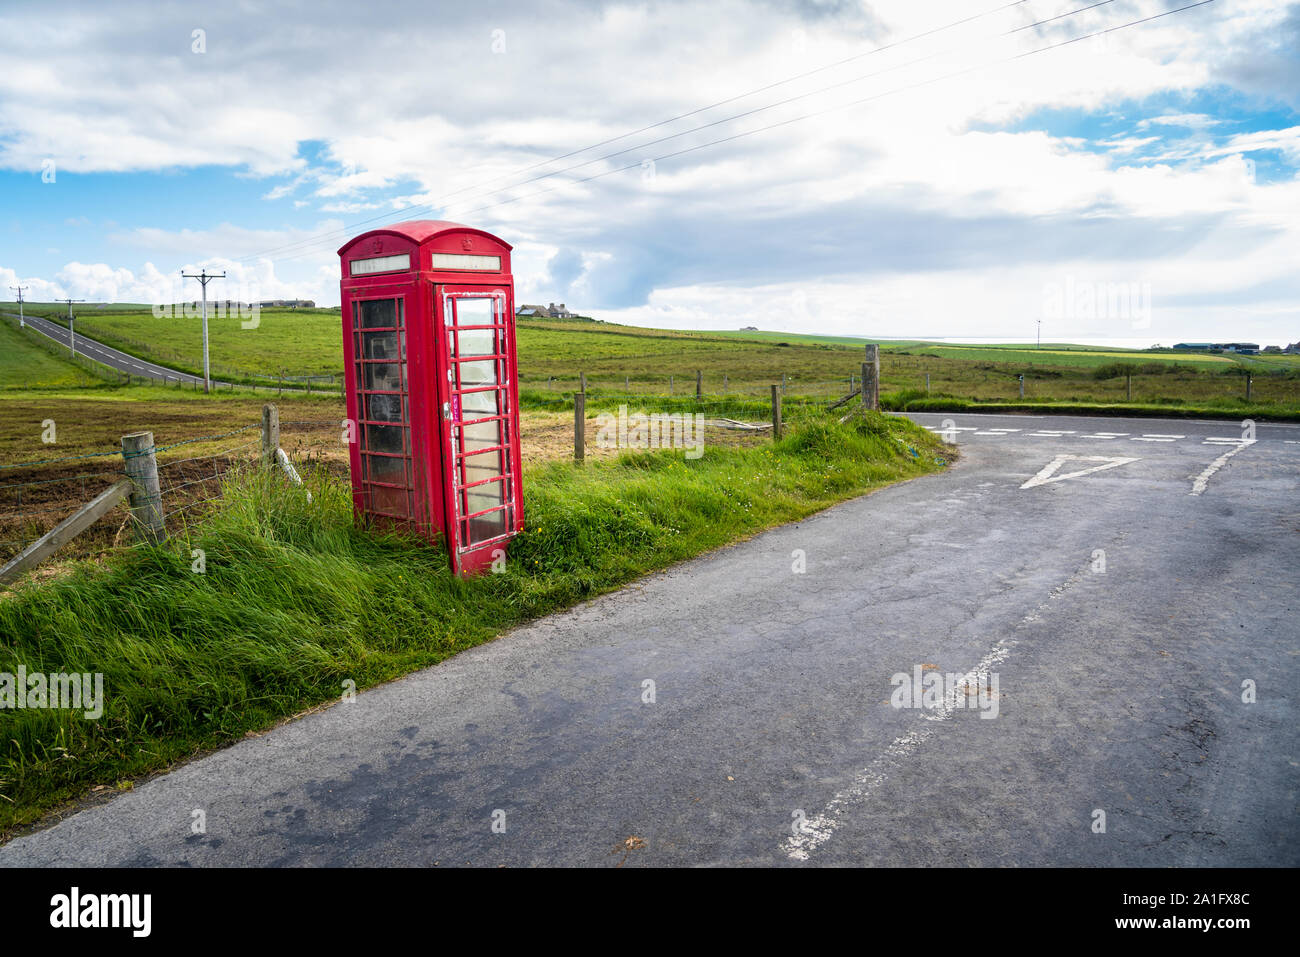 Lonely traditional British telephone booth near an intersection in the countryside on a partly cloudy spring day Stock Photo